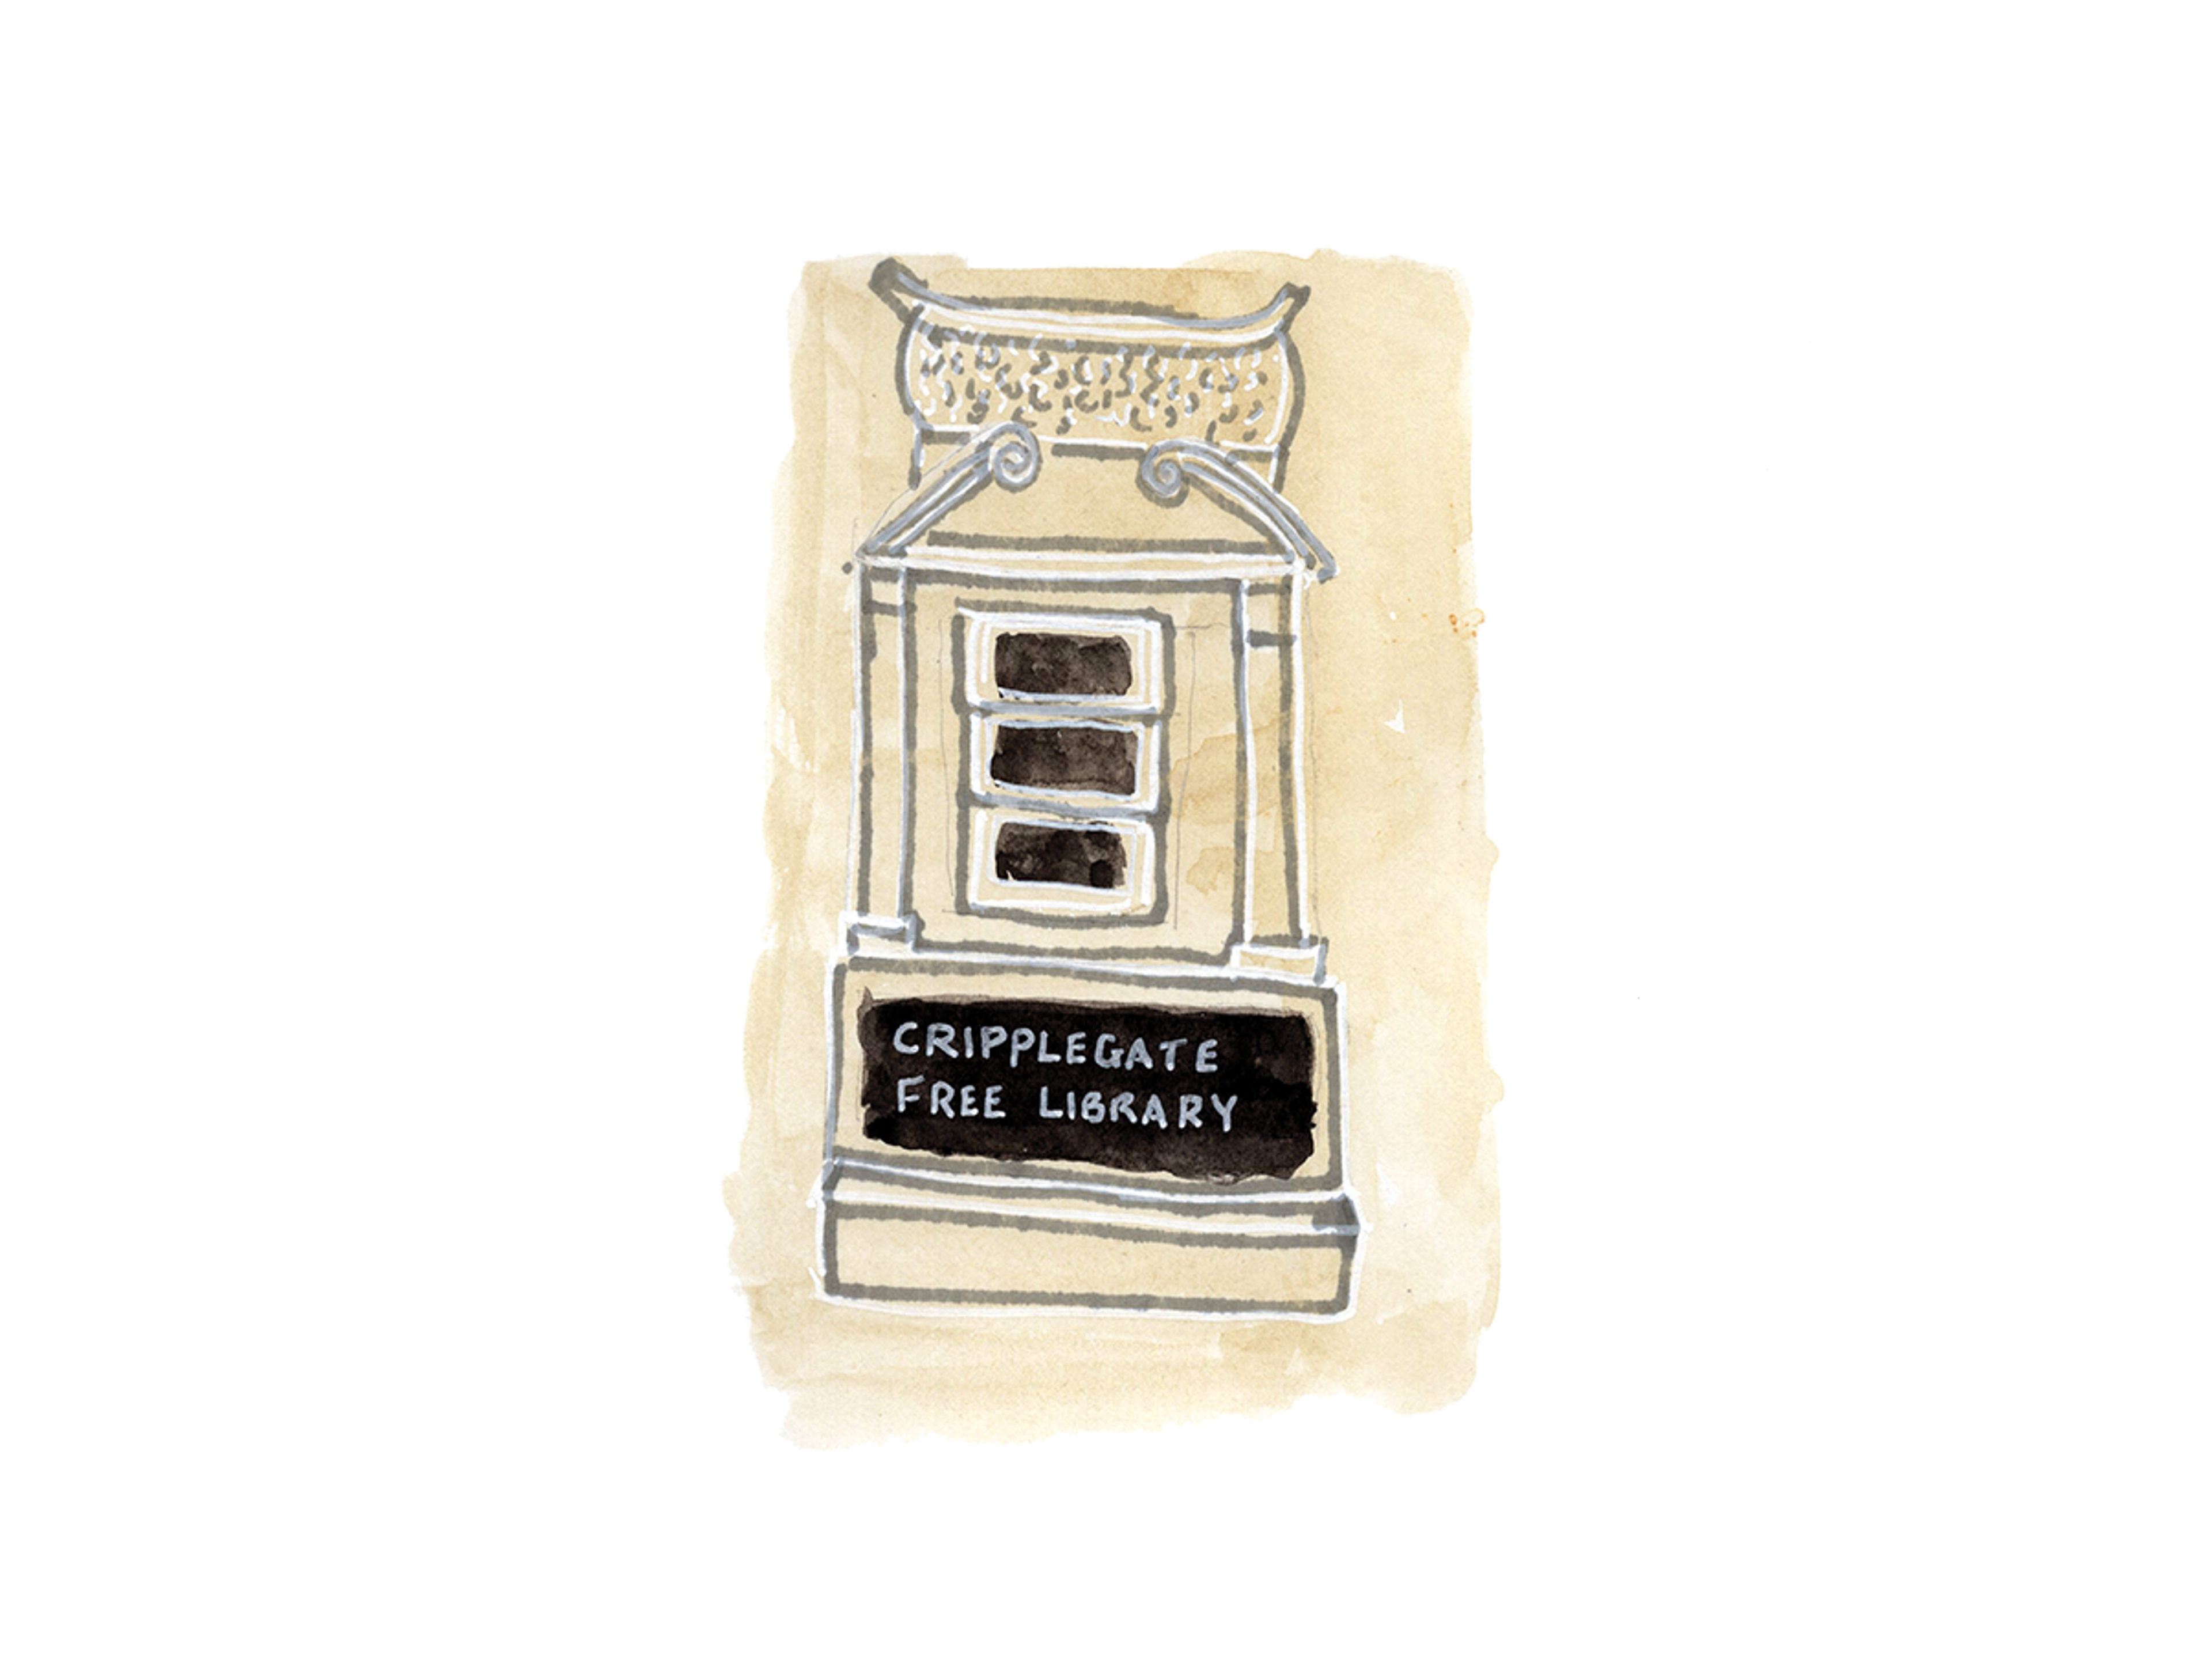 Illustration of an ornate architectural feature, possibly a postbox, with a sign reading Cripplegate Free Library